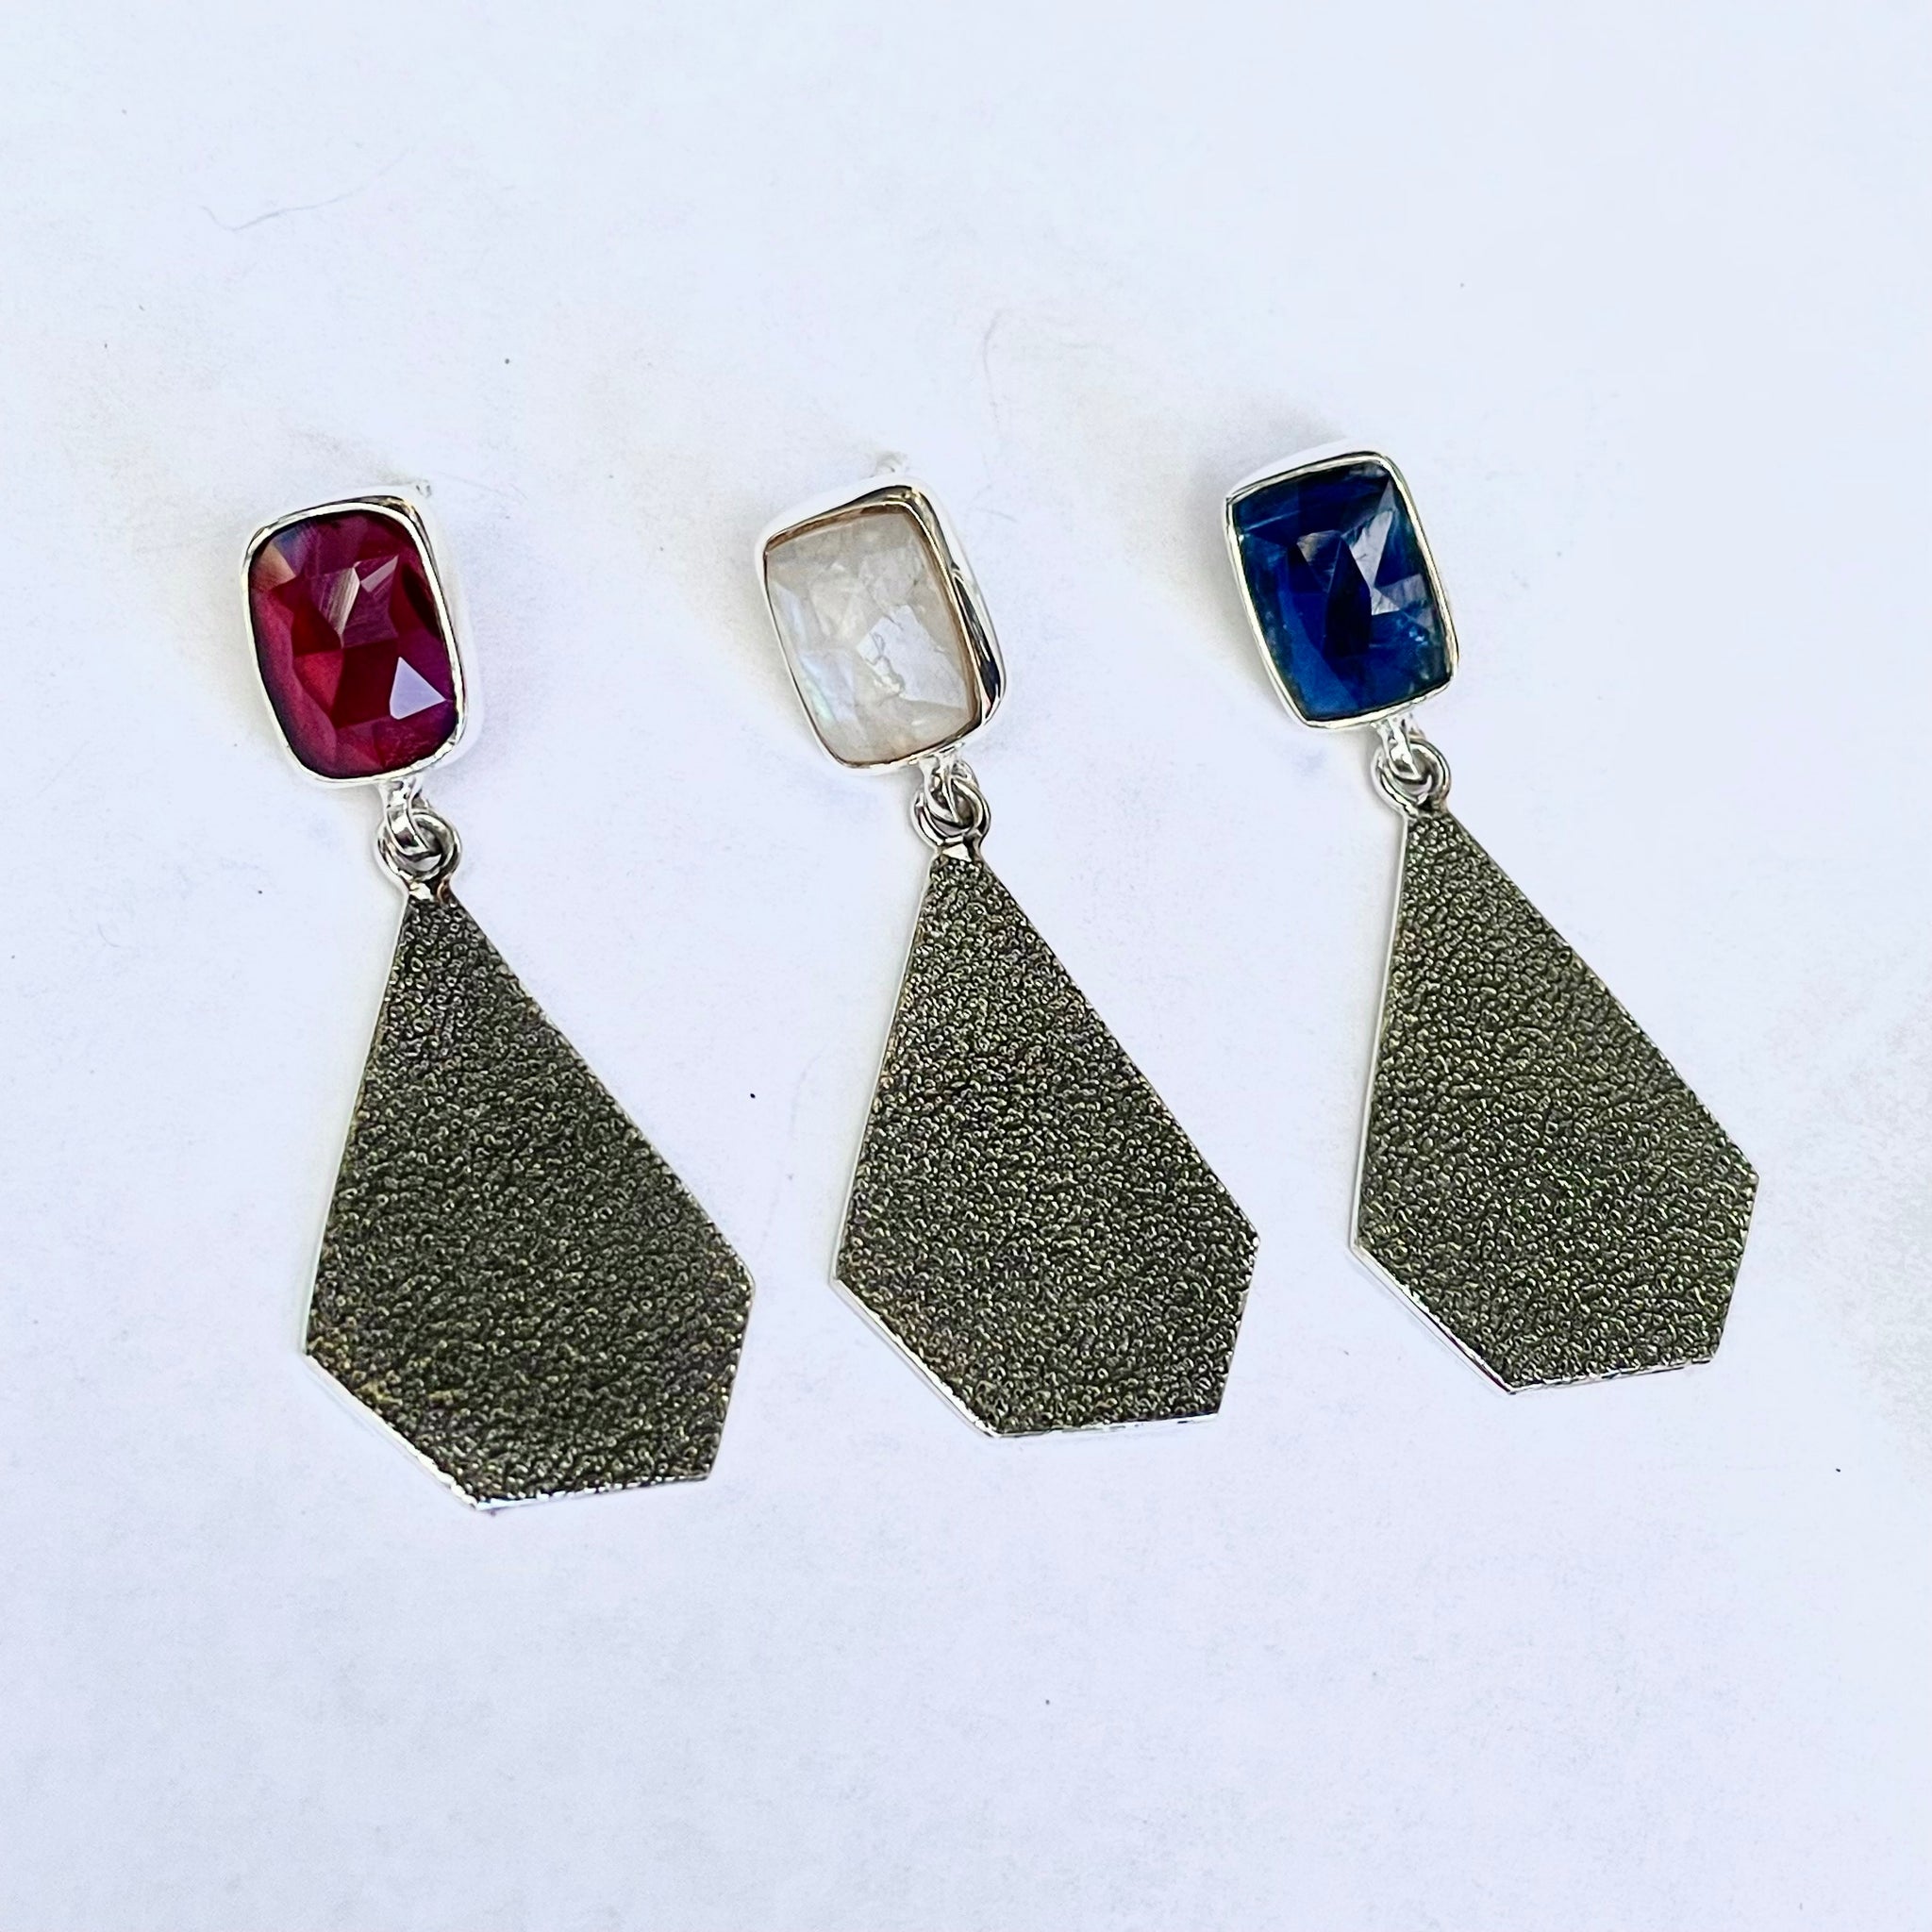 A selection of earrings made from Garnet, Moonstone and Kyanite.